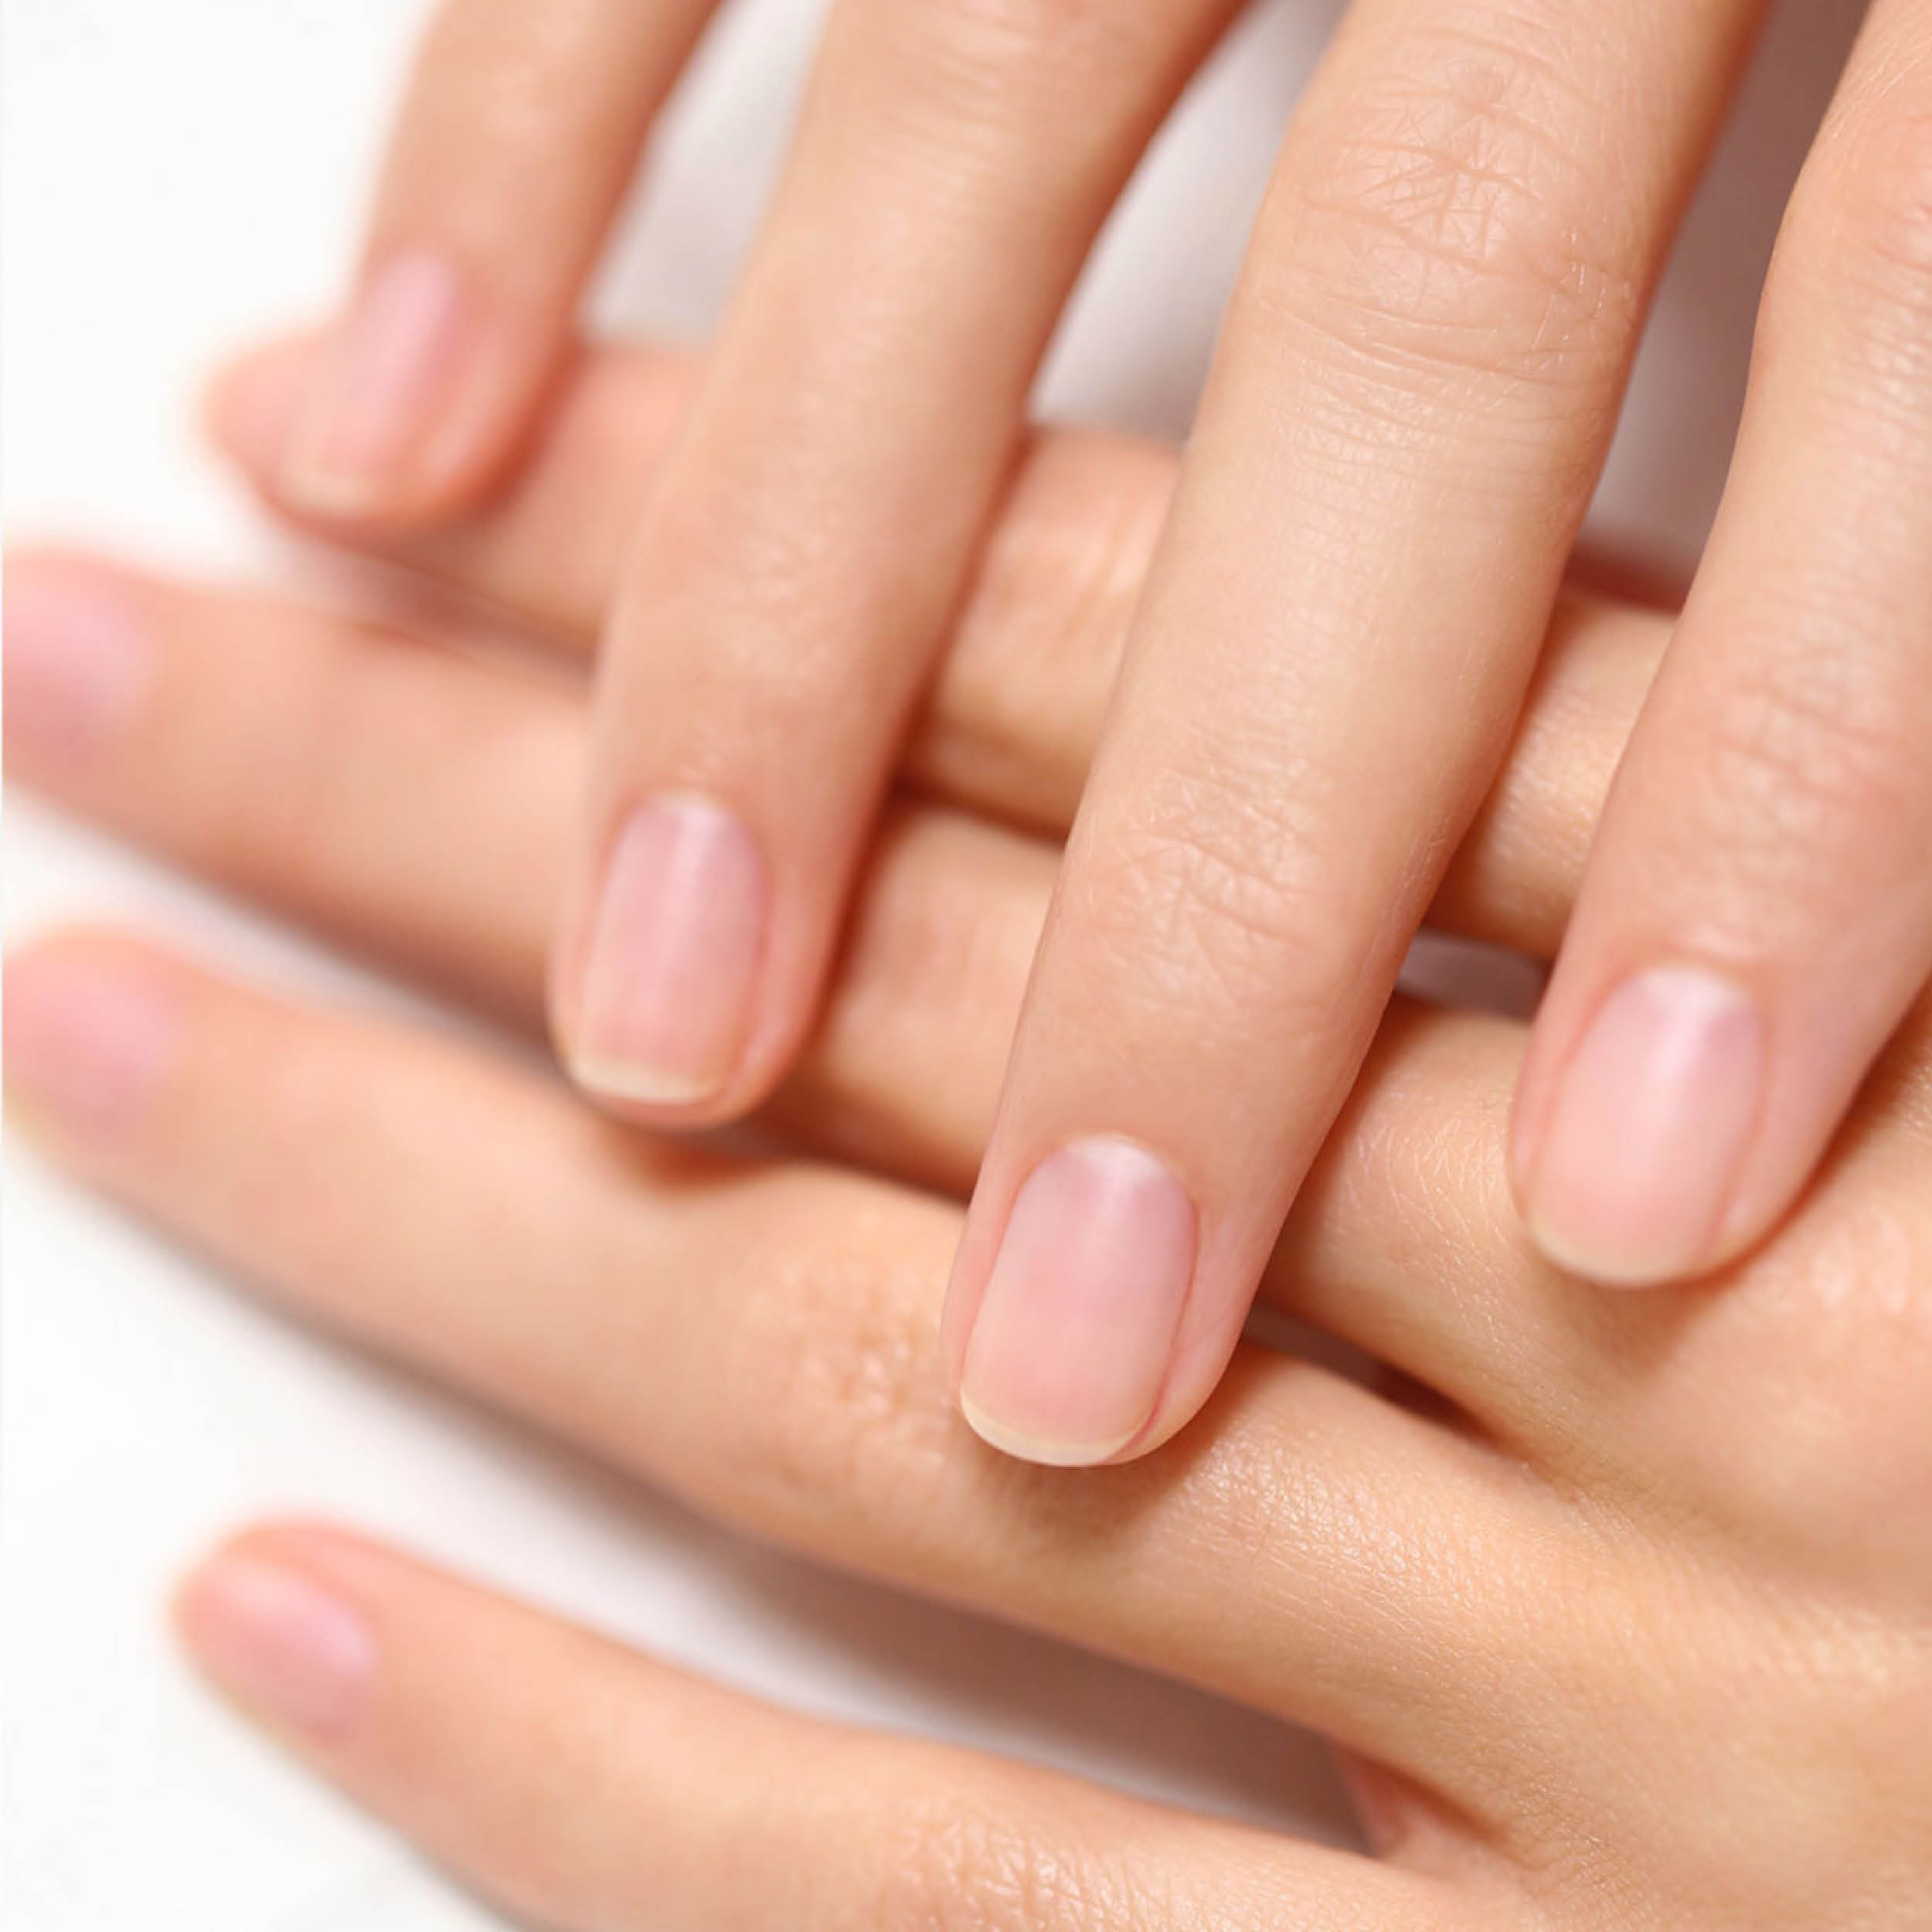 How to prep your nails before a manicure